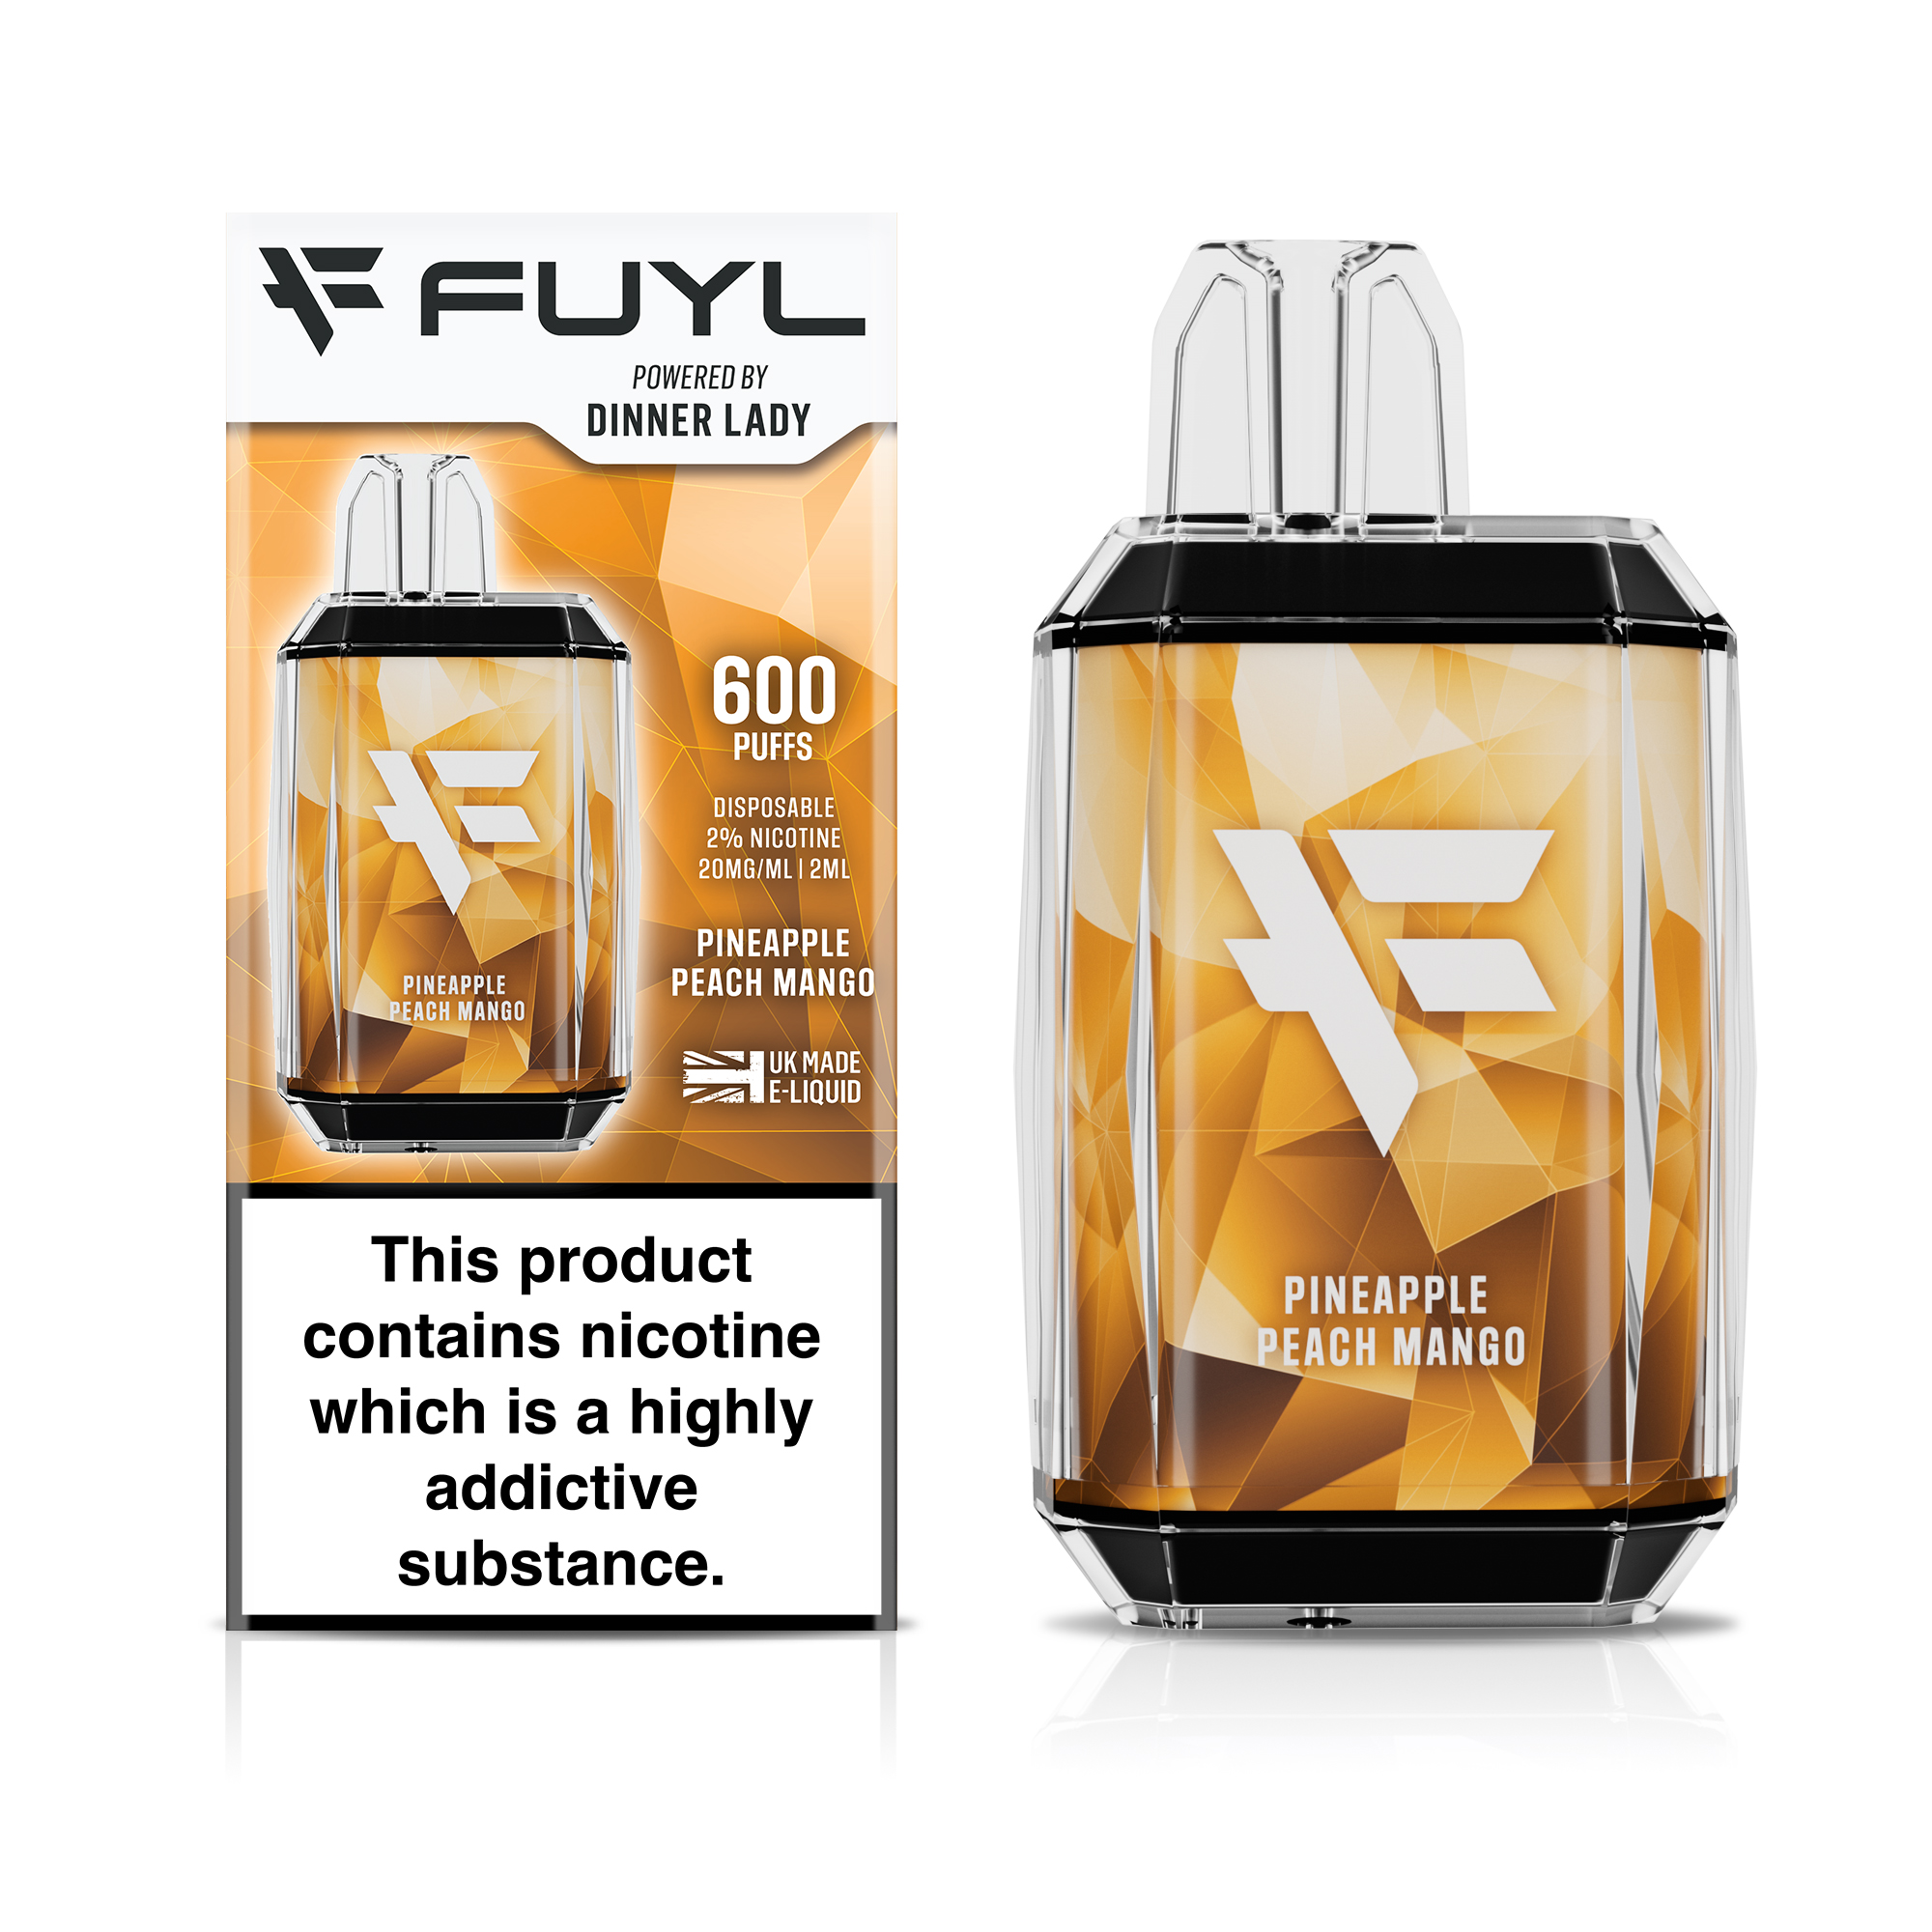 Pineapple Peach Mango by Fuyl Dinner Lady 600puff Disposable